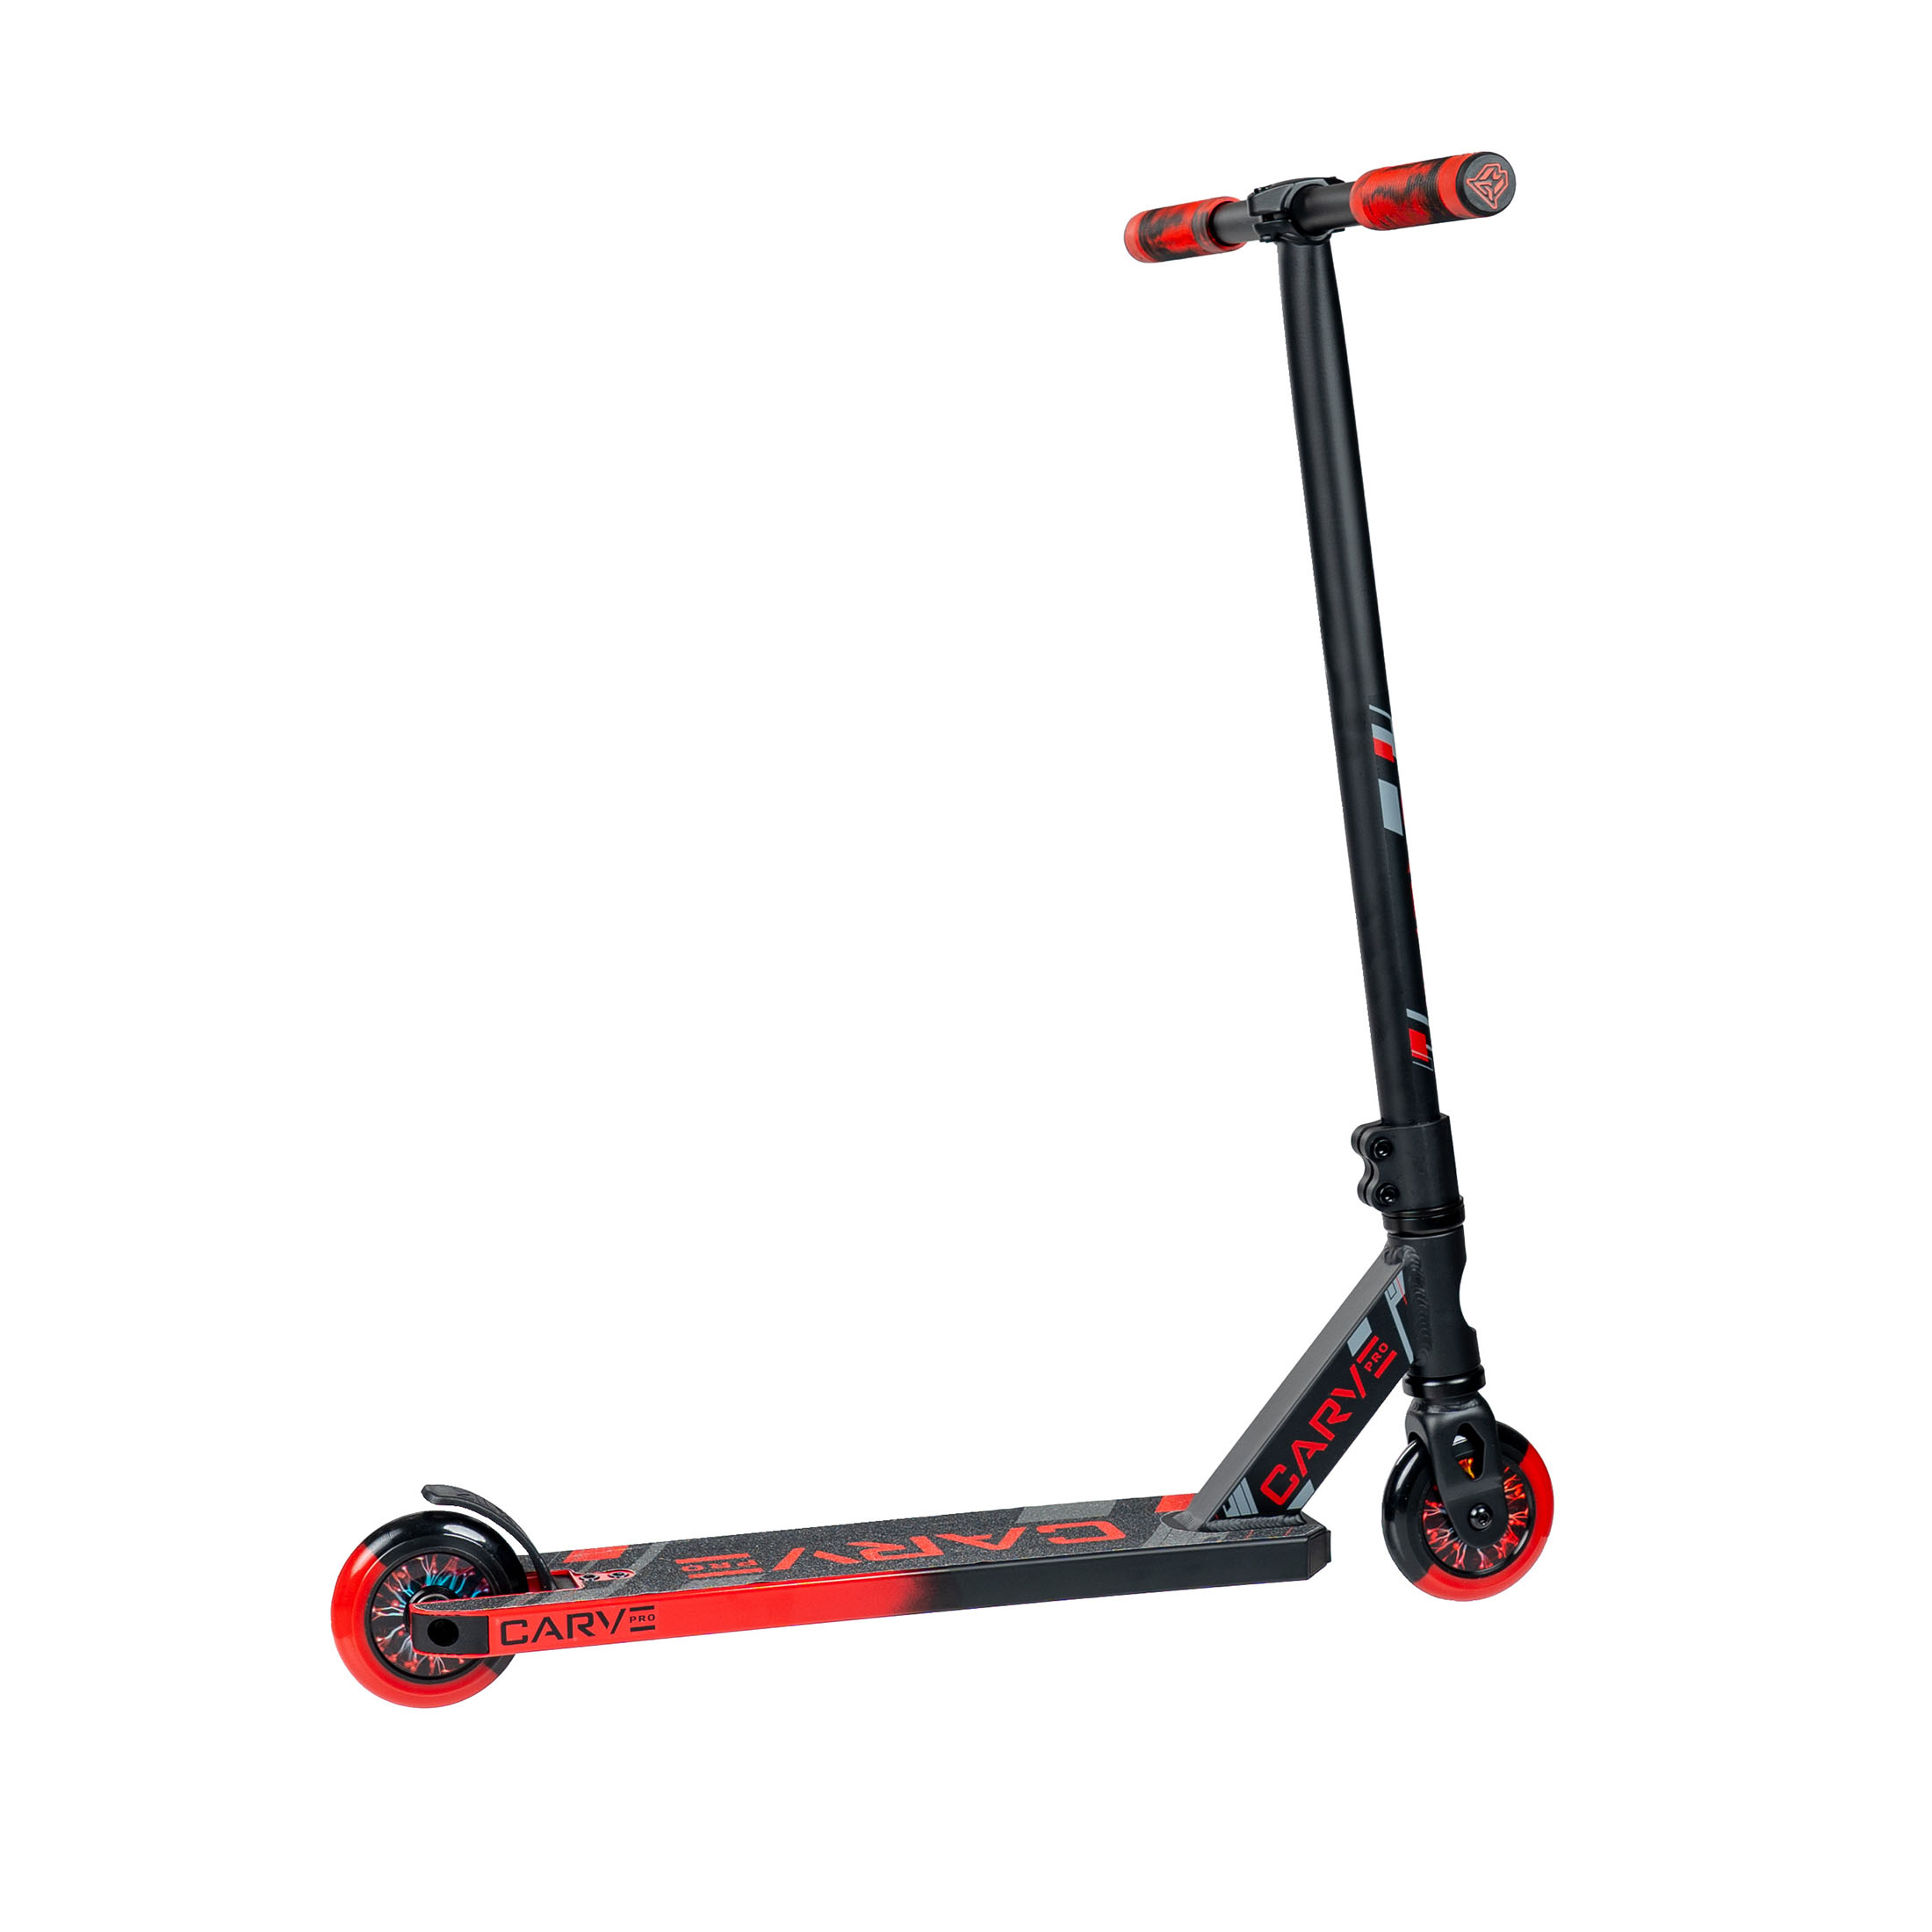 Madd Carve Pro Freestyle Stunt Scooter - Strong Aluminum for Beginner 6 Yrs + - Walmart.com